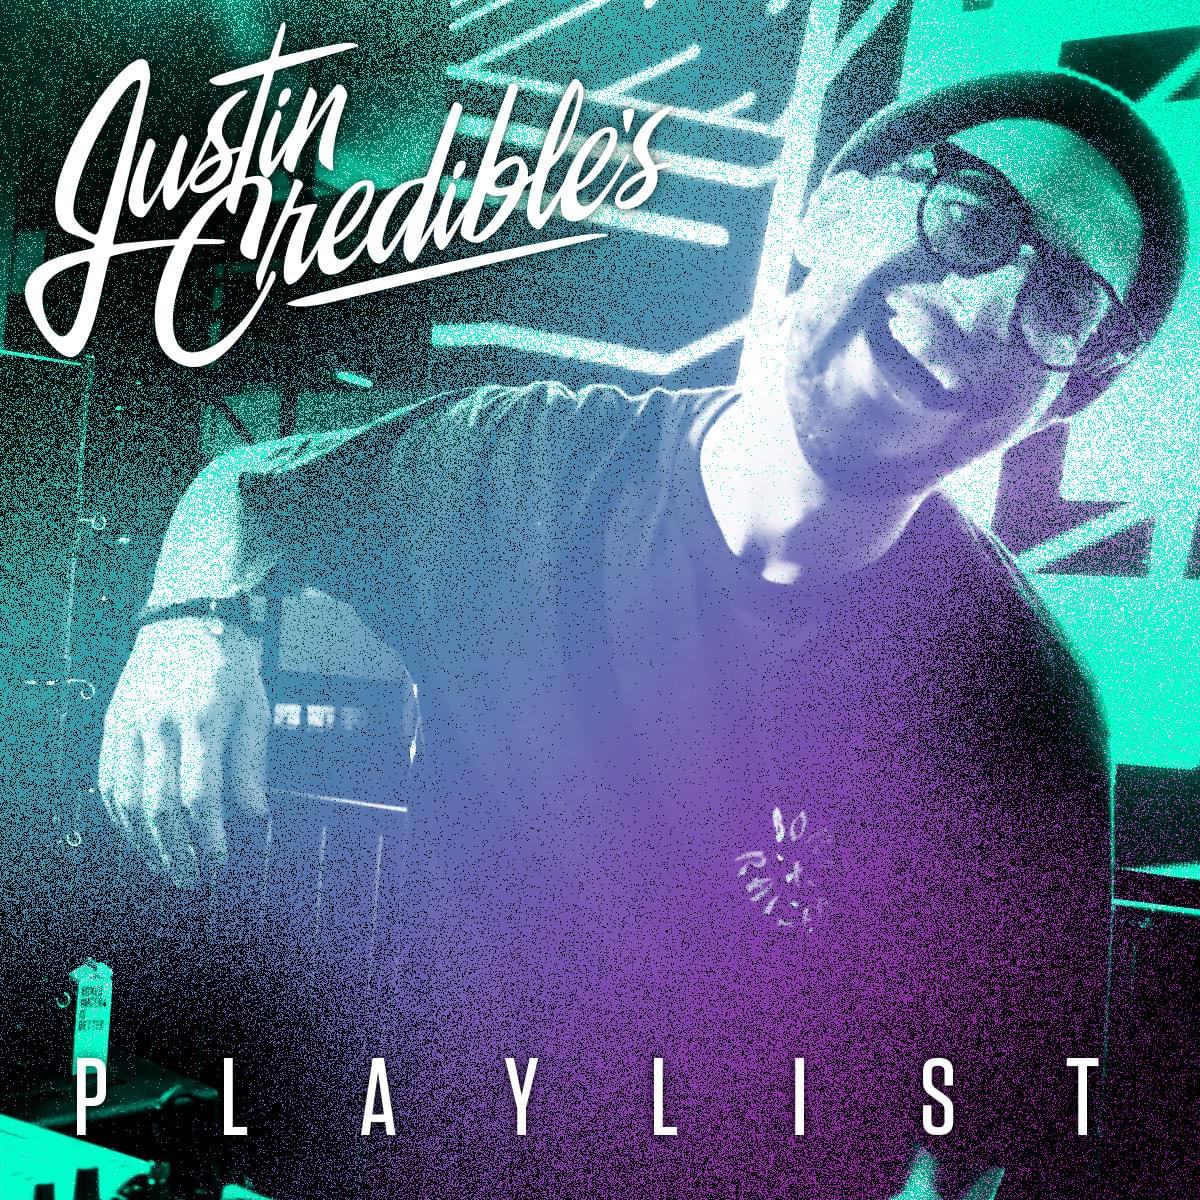 Justin Credible Has 10 of The Hottest New Hip Hop Tracks on His Jus10 Playlist [STREAM]